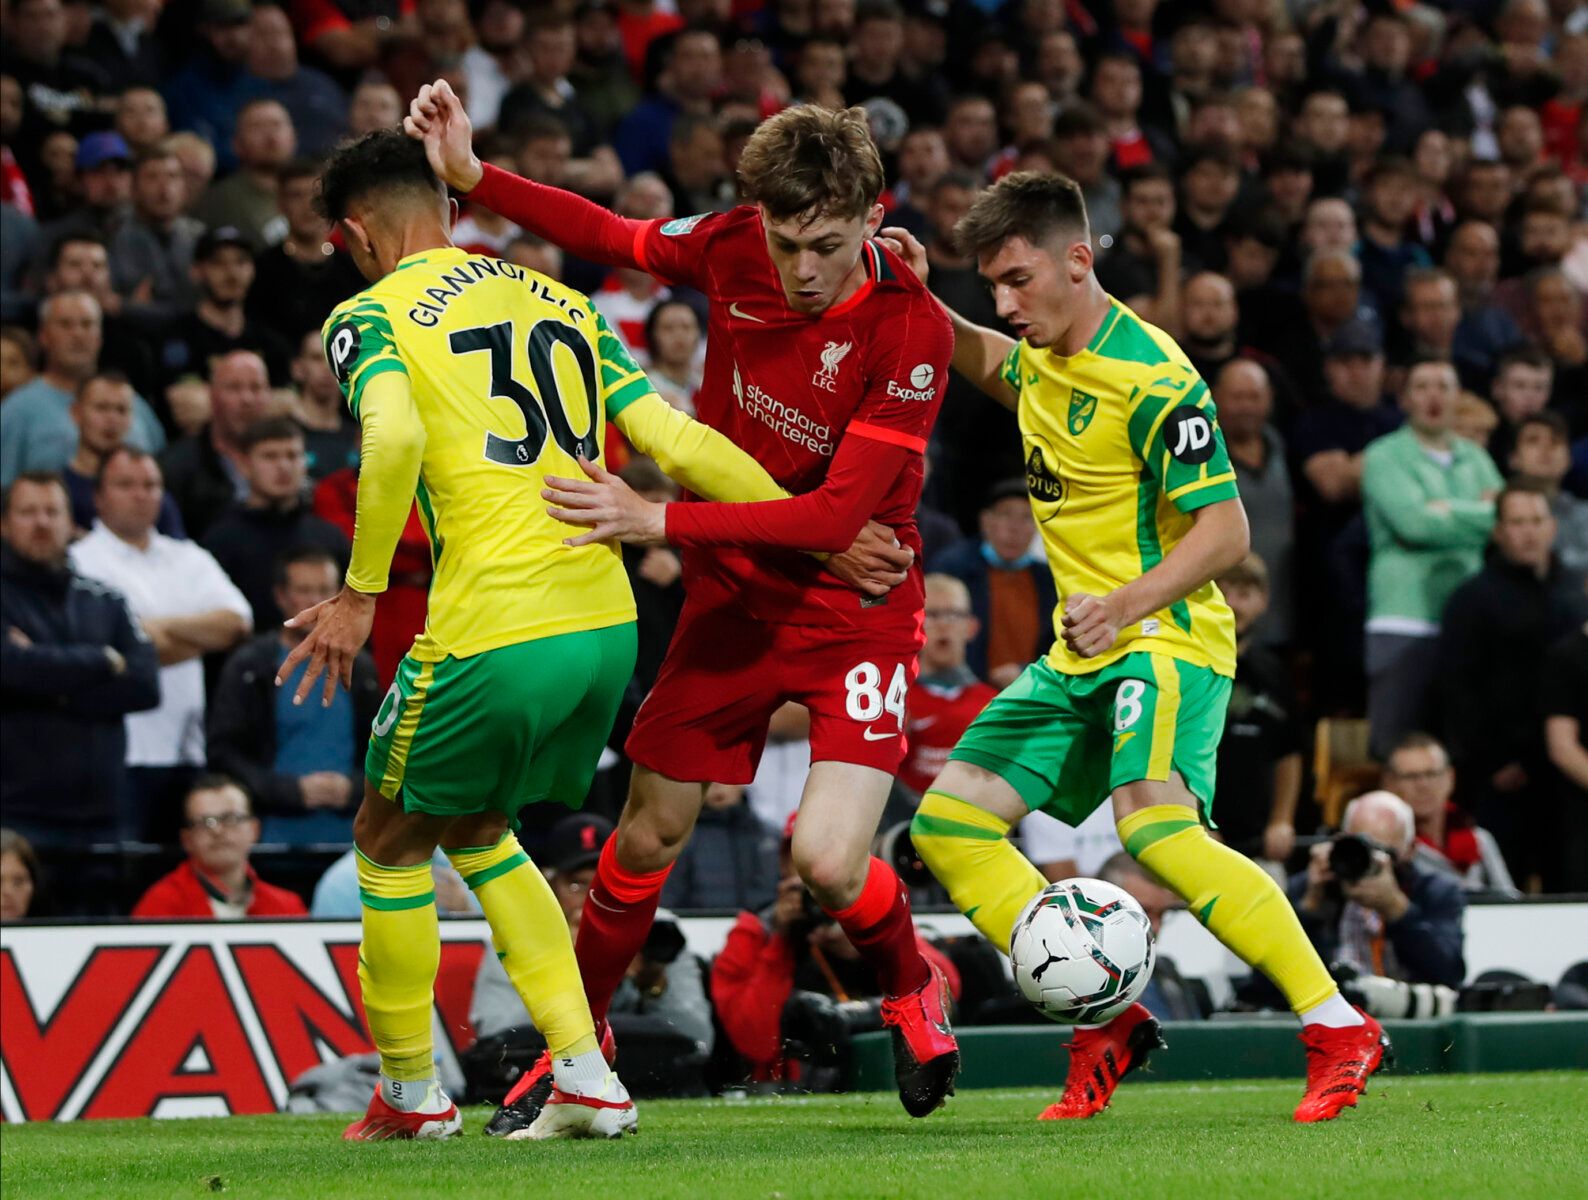 Soccer Football - Carabao Cup - Third Round - Norwich City v Liverpool - Carrow Road, Norwich, Britain - September 21, 2021 Norwich City's Dimitris Giannoulis and Billy Gilmour in action with Liverpool's Conor Bradley Action Images via Reuters/Paul Childs EDITORIAL USE ONLY. No use with unauthorized audio, video, data, fixture lists, club/league logos or 'live' services. Online in-match use limited to 75 images, no video emulation. No use in betting, games or single club /league/player publicati